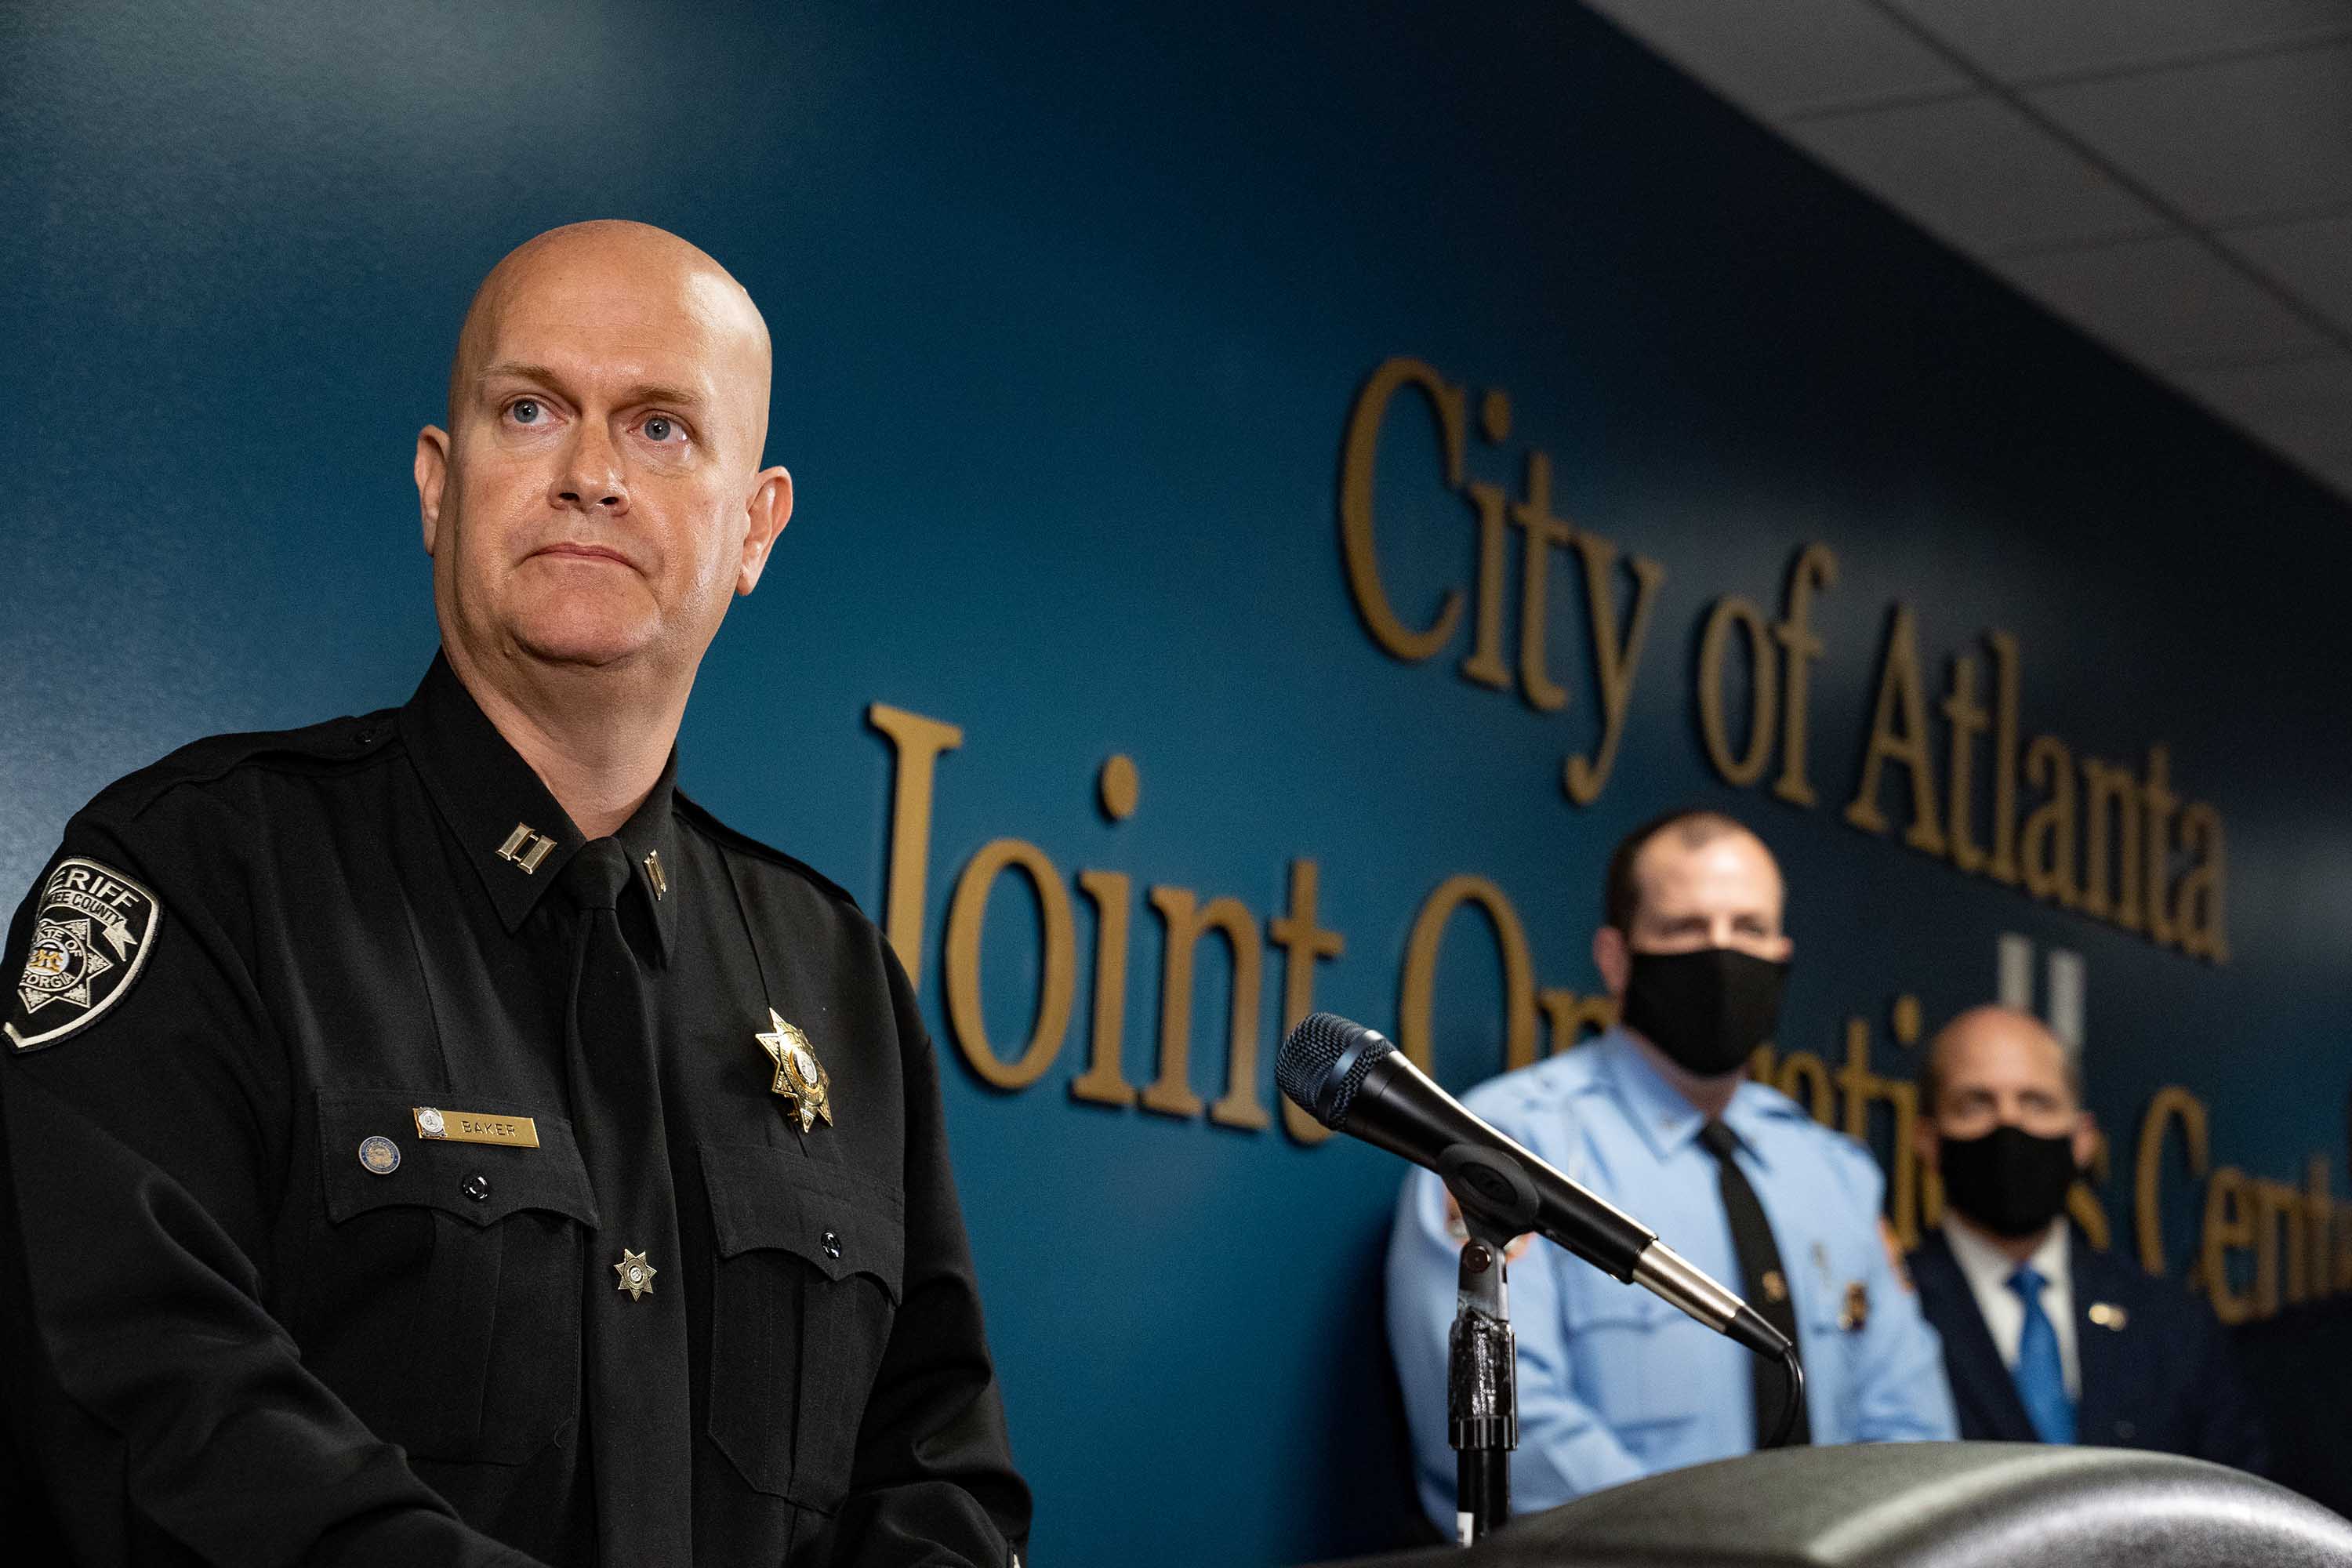 Captain Jay Baker, left, speaks at a press conference on March 17, 2021 in Atlanta, Georgia. Suspect Robert Aaron Long, 21, was arrested after a series of shootings at three Atlanta-area spas left eight people dead on Tuesday night, including six Asian women.(Photo by Megan Varner/Getty Images)